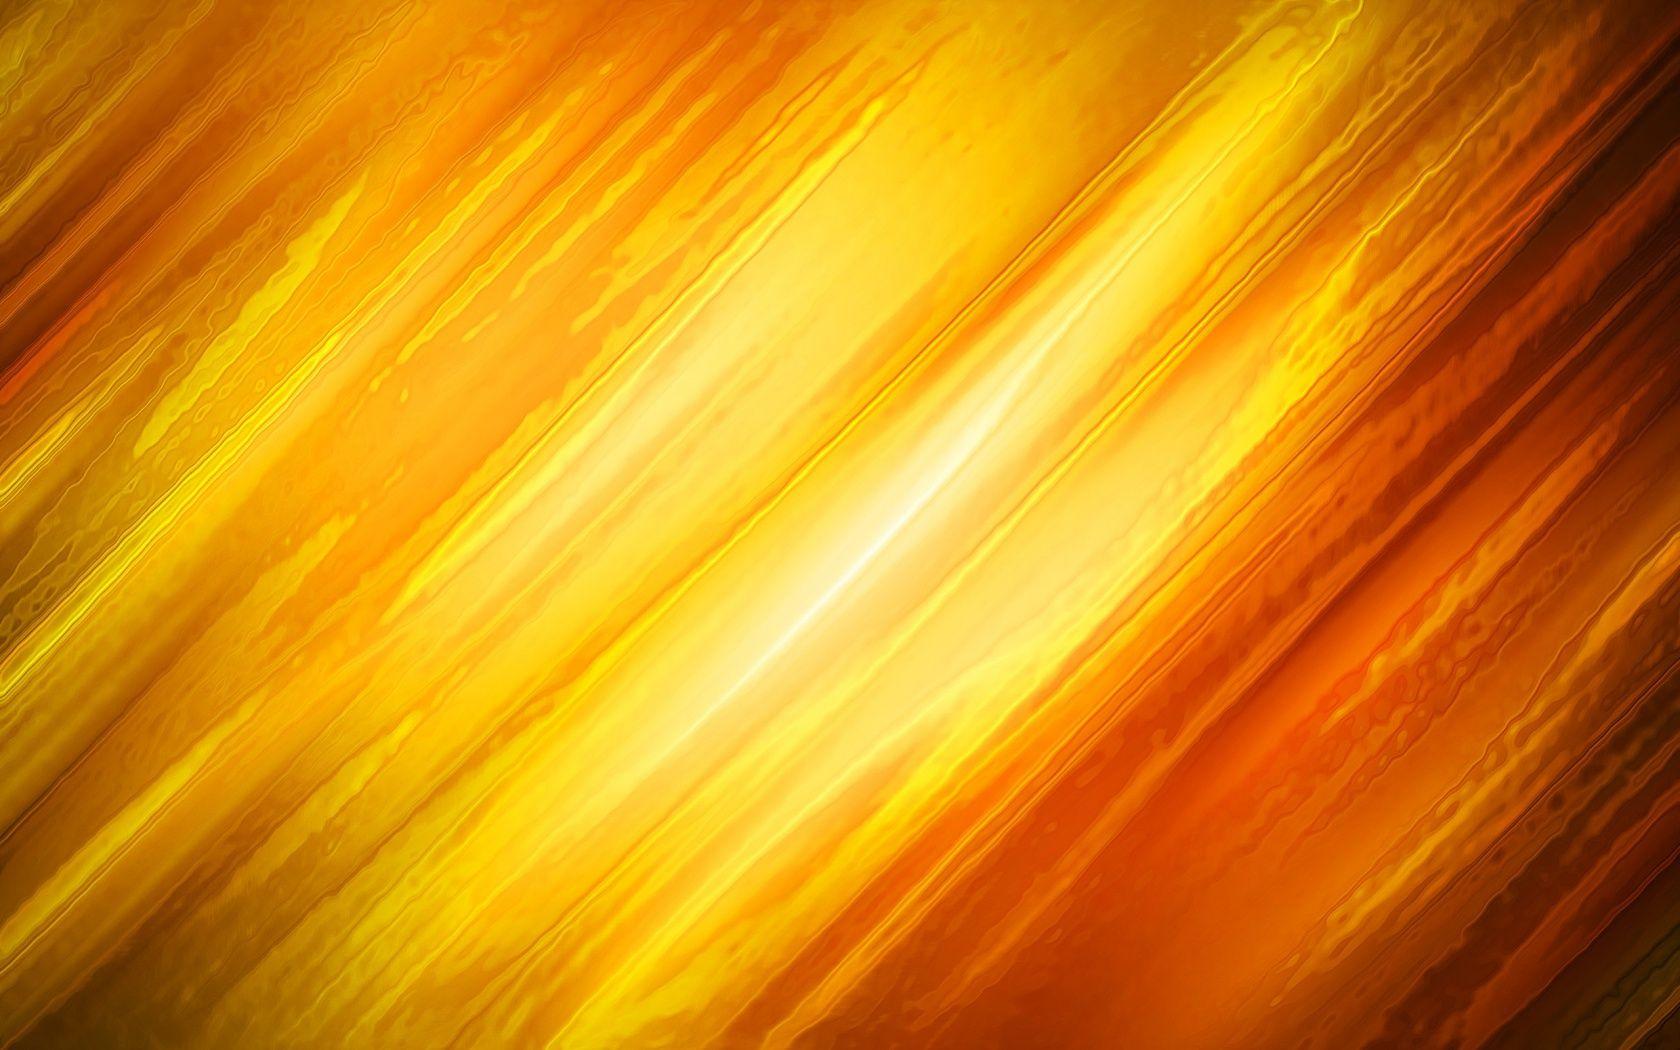 Yellow and Orange Abstract Background more similiar image at